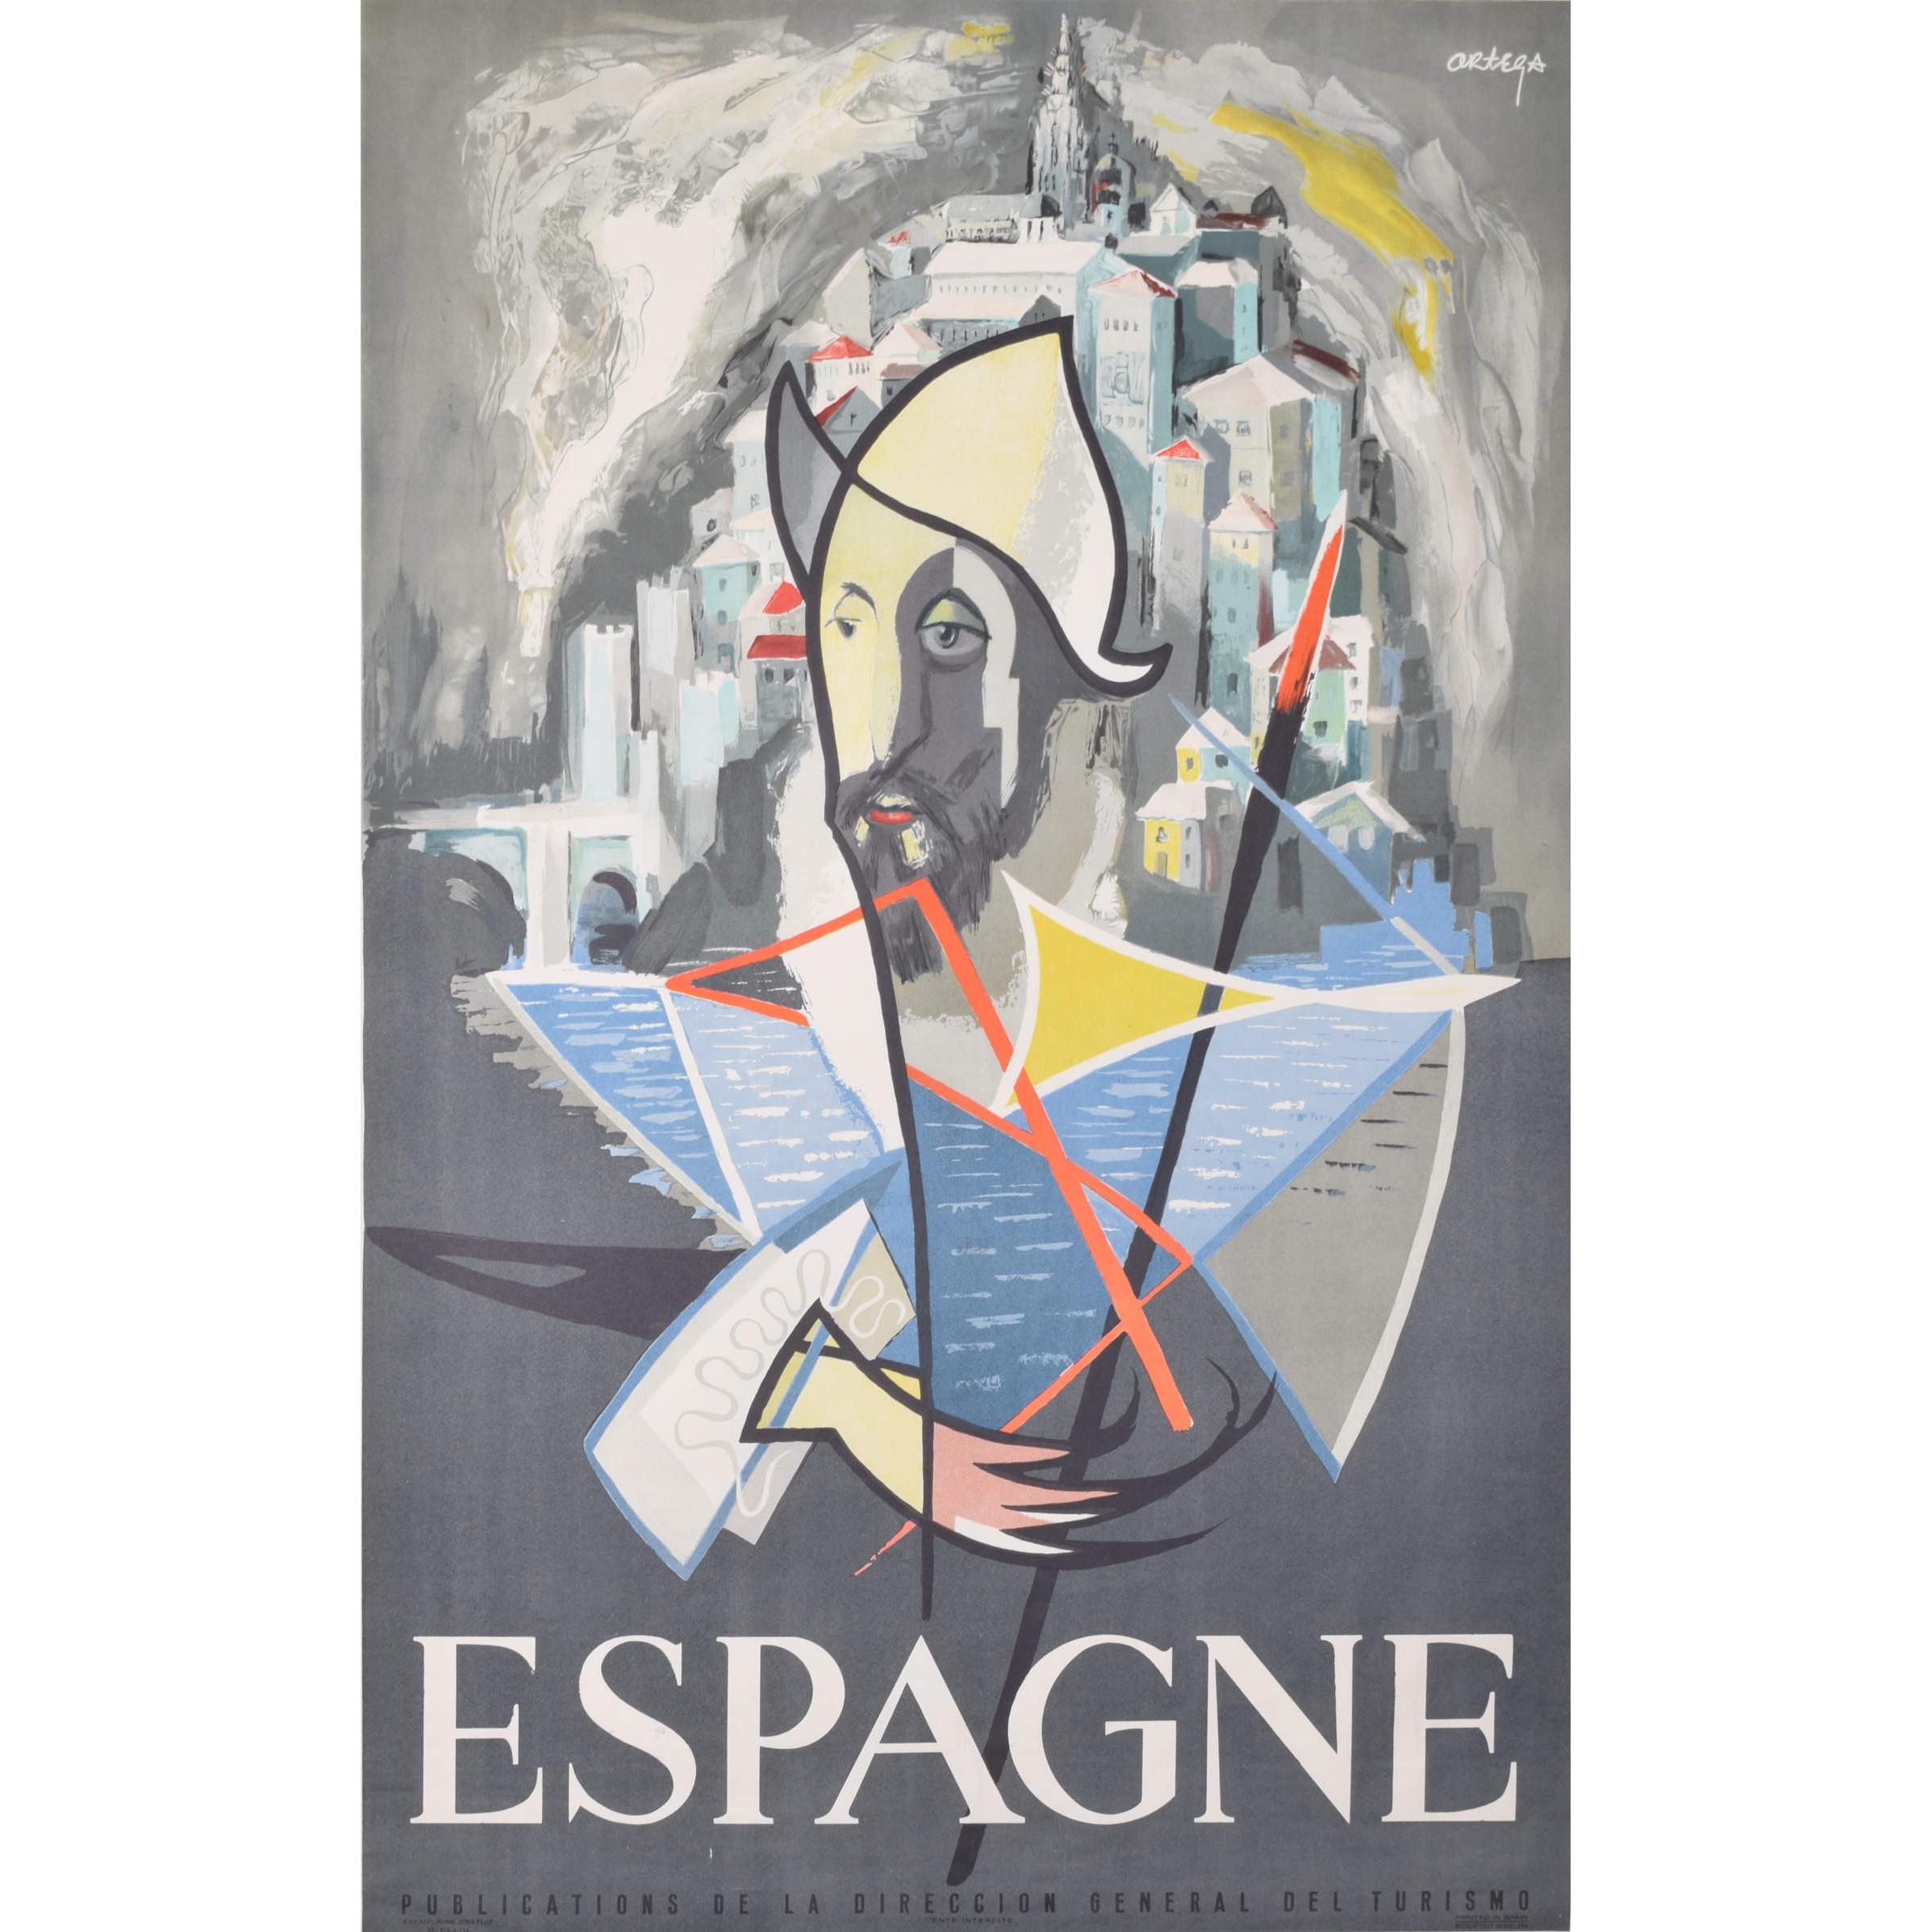 To see our other original vintage travel posters, scroll down to "More from this Seller" and below it click on "See all from this Seller", or send us a message if you cannot find the poster you want.

José Ortega (1921 - 1990)
Espagne "Don Quixote"